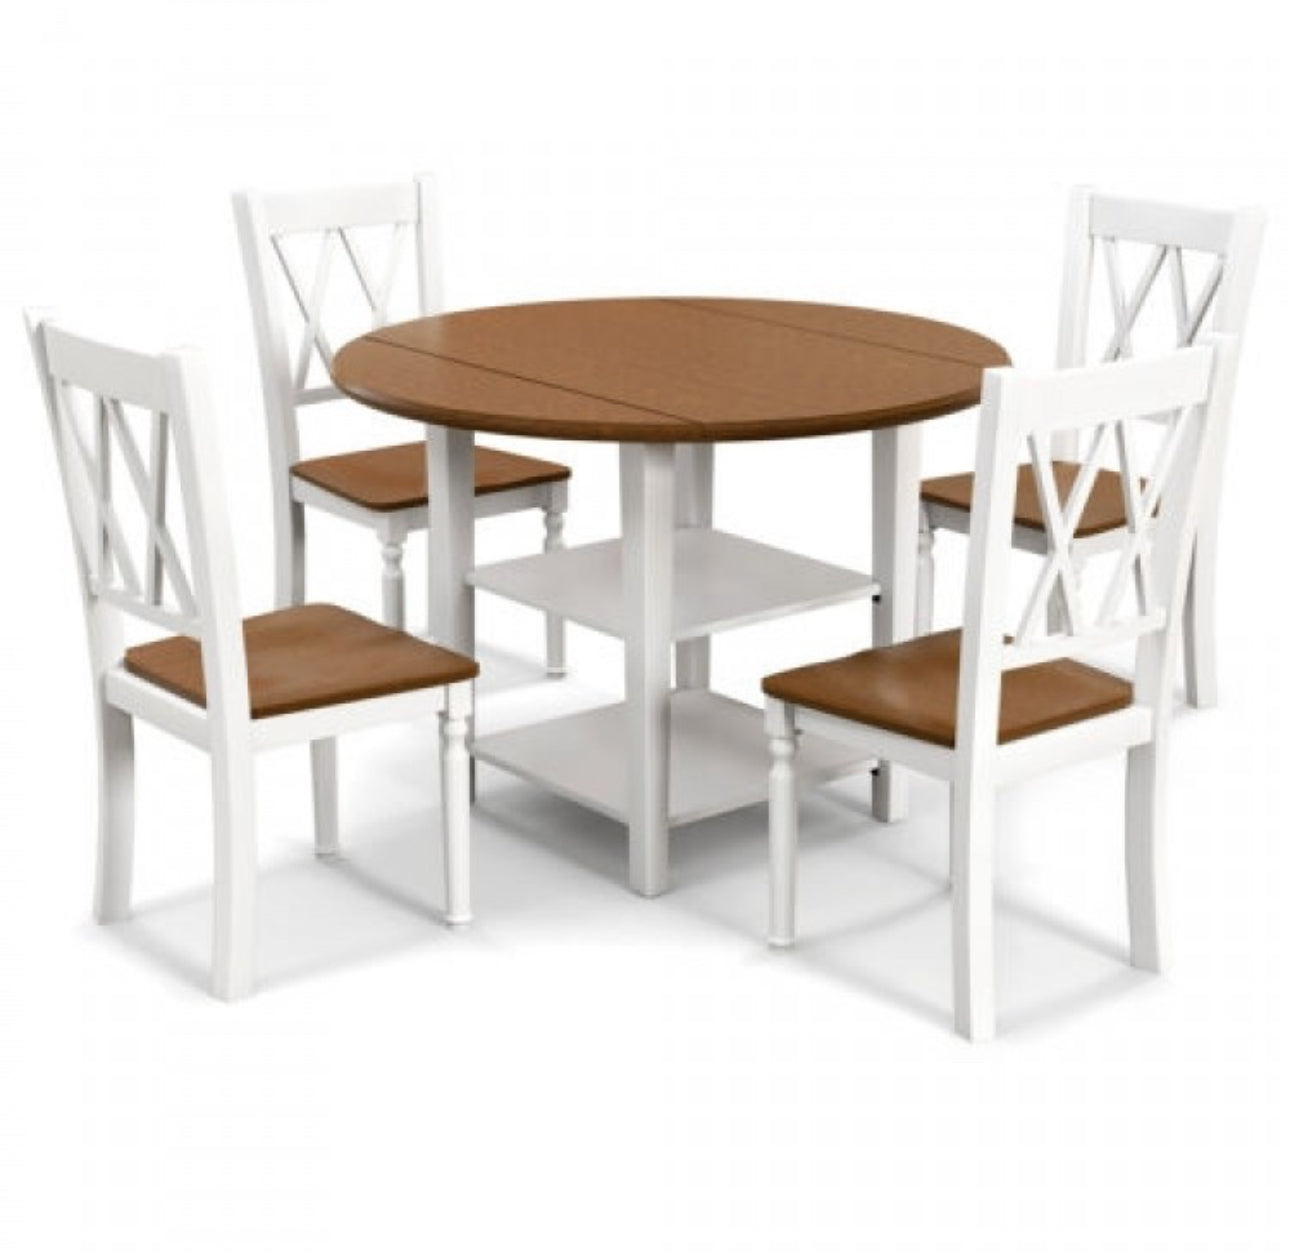 Classy, Elegant Heavy Duty 5-Piece Smooth Round Kitchen Dining Set With Drop Leaf Table Top | 2-Tier Bottom Shelf